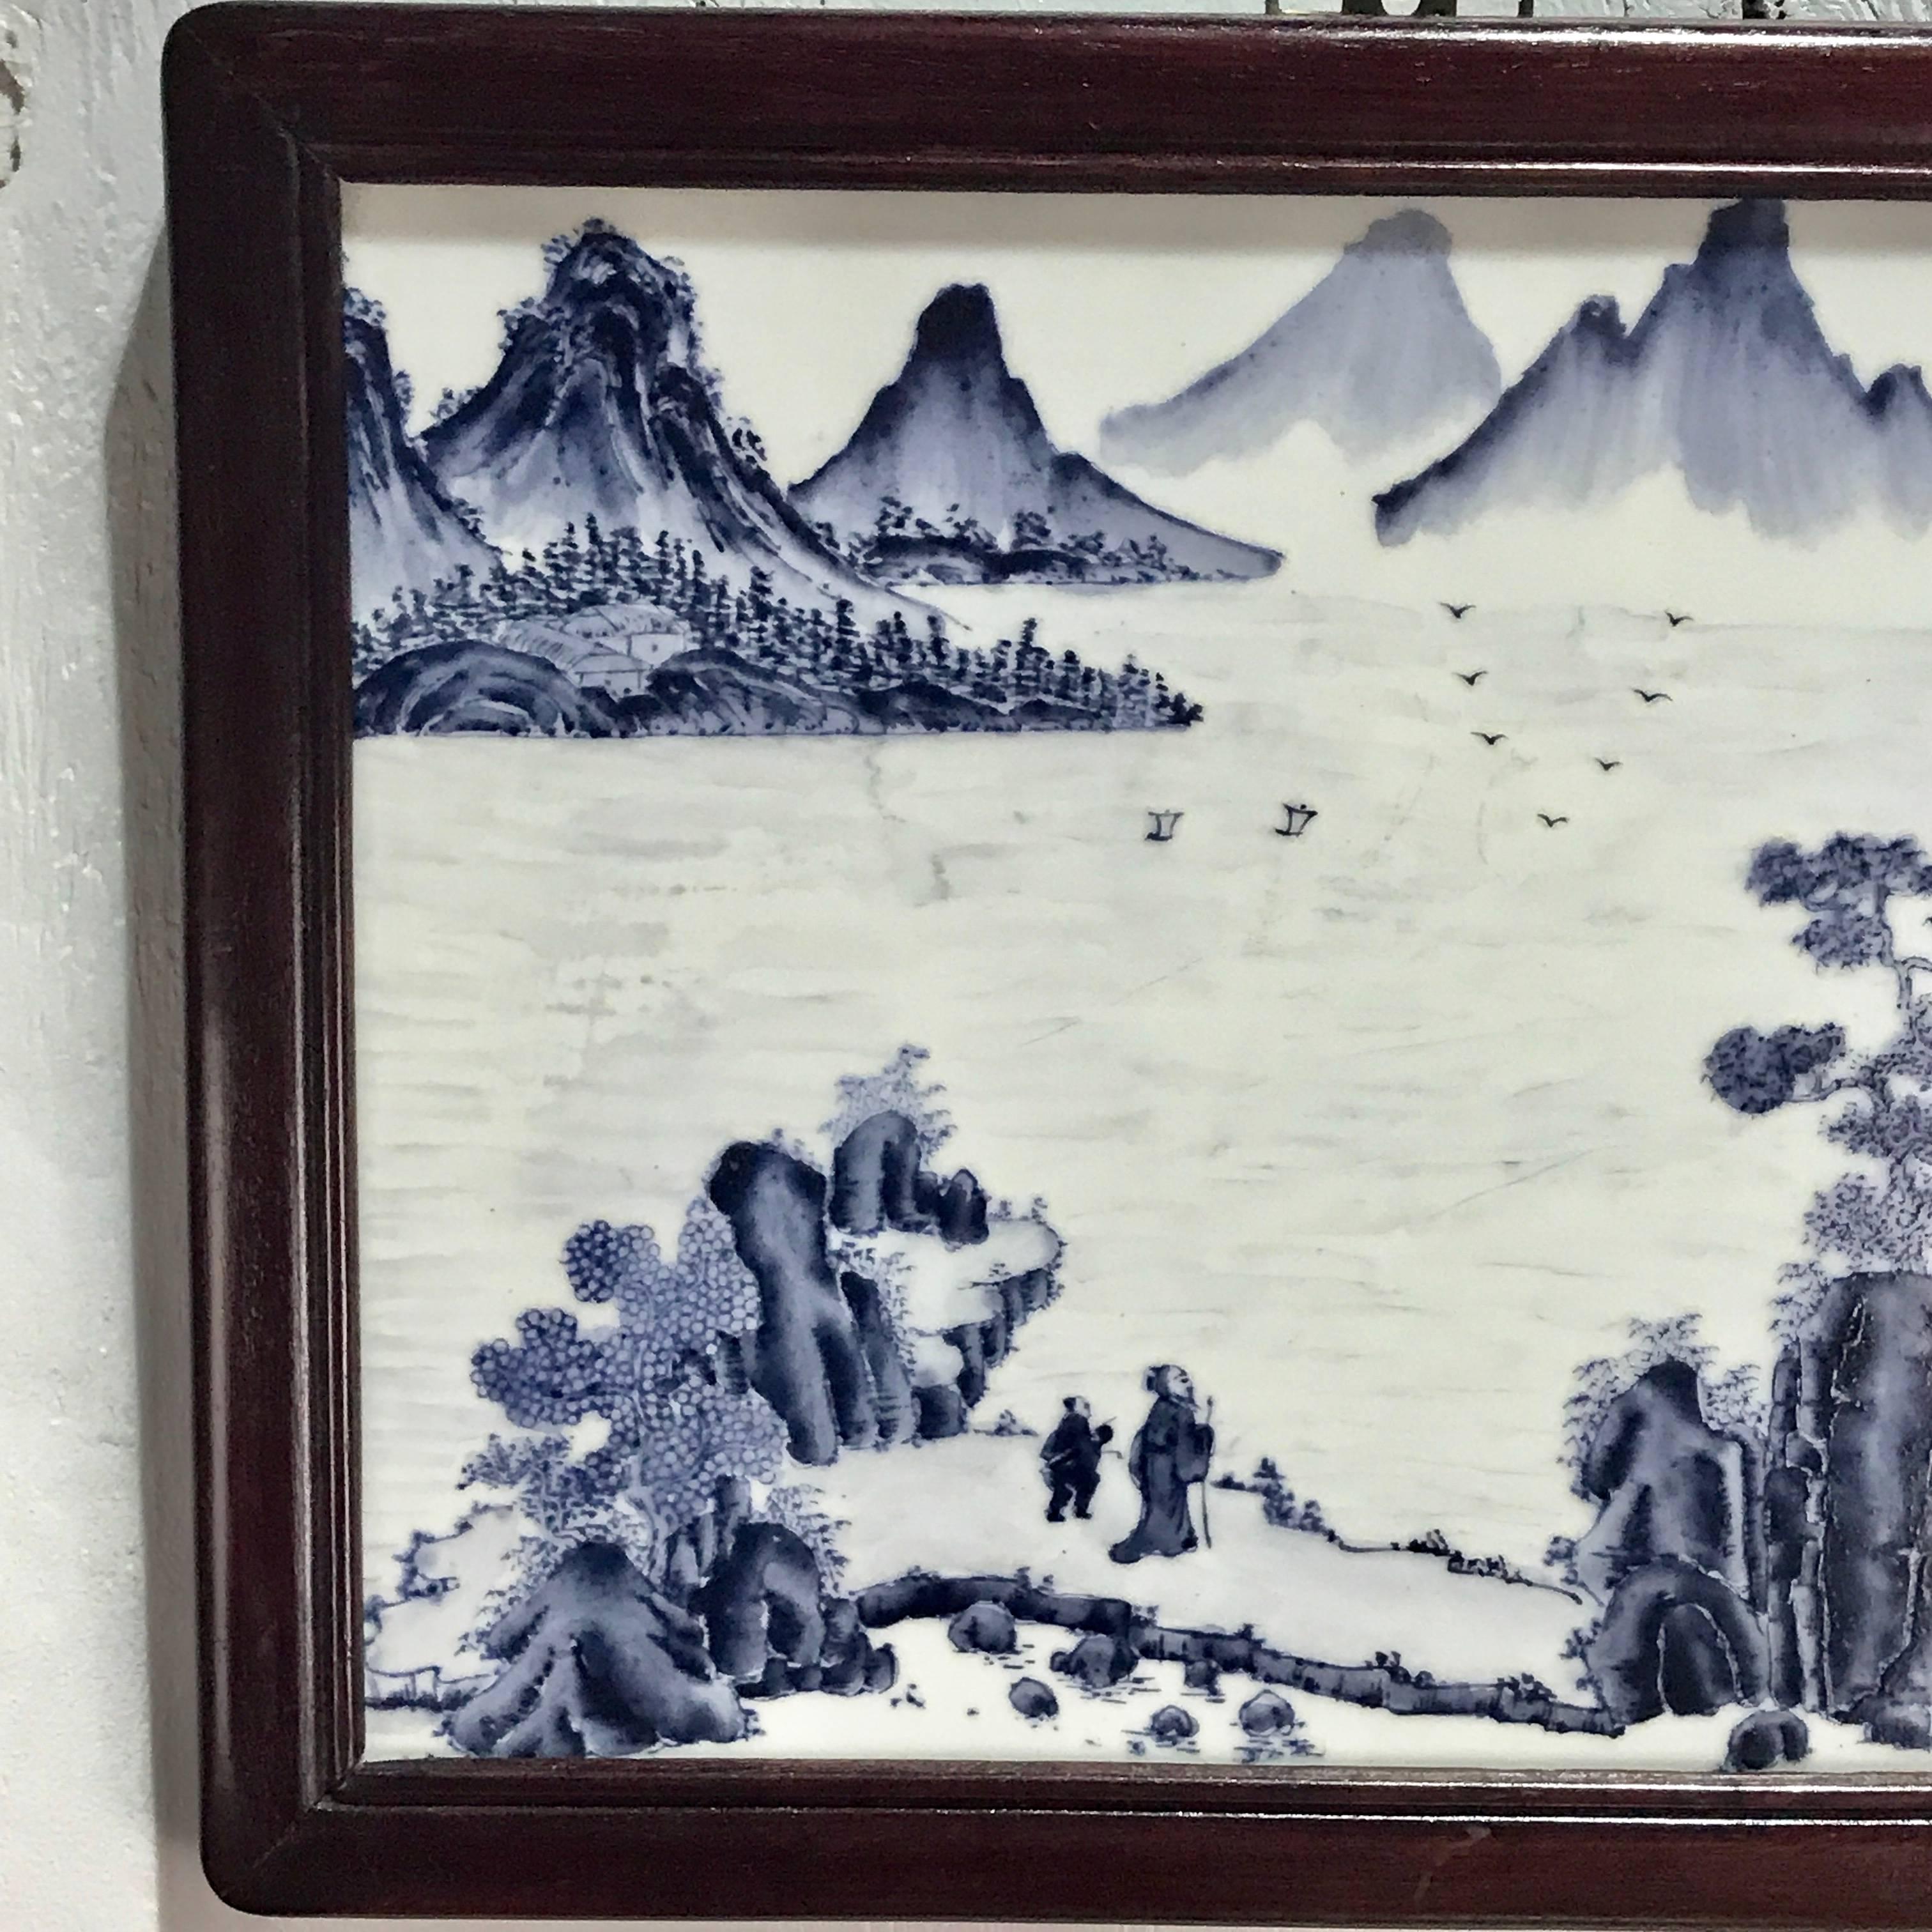 Republic Blue & White Chinese Export Porcelain Framed Plaque, finely painted landscape reserves in a brass mounted hardwood frame. The porcelain plaque measures 14.75